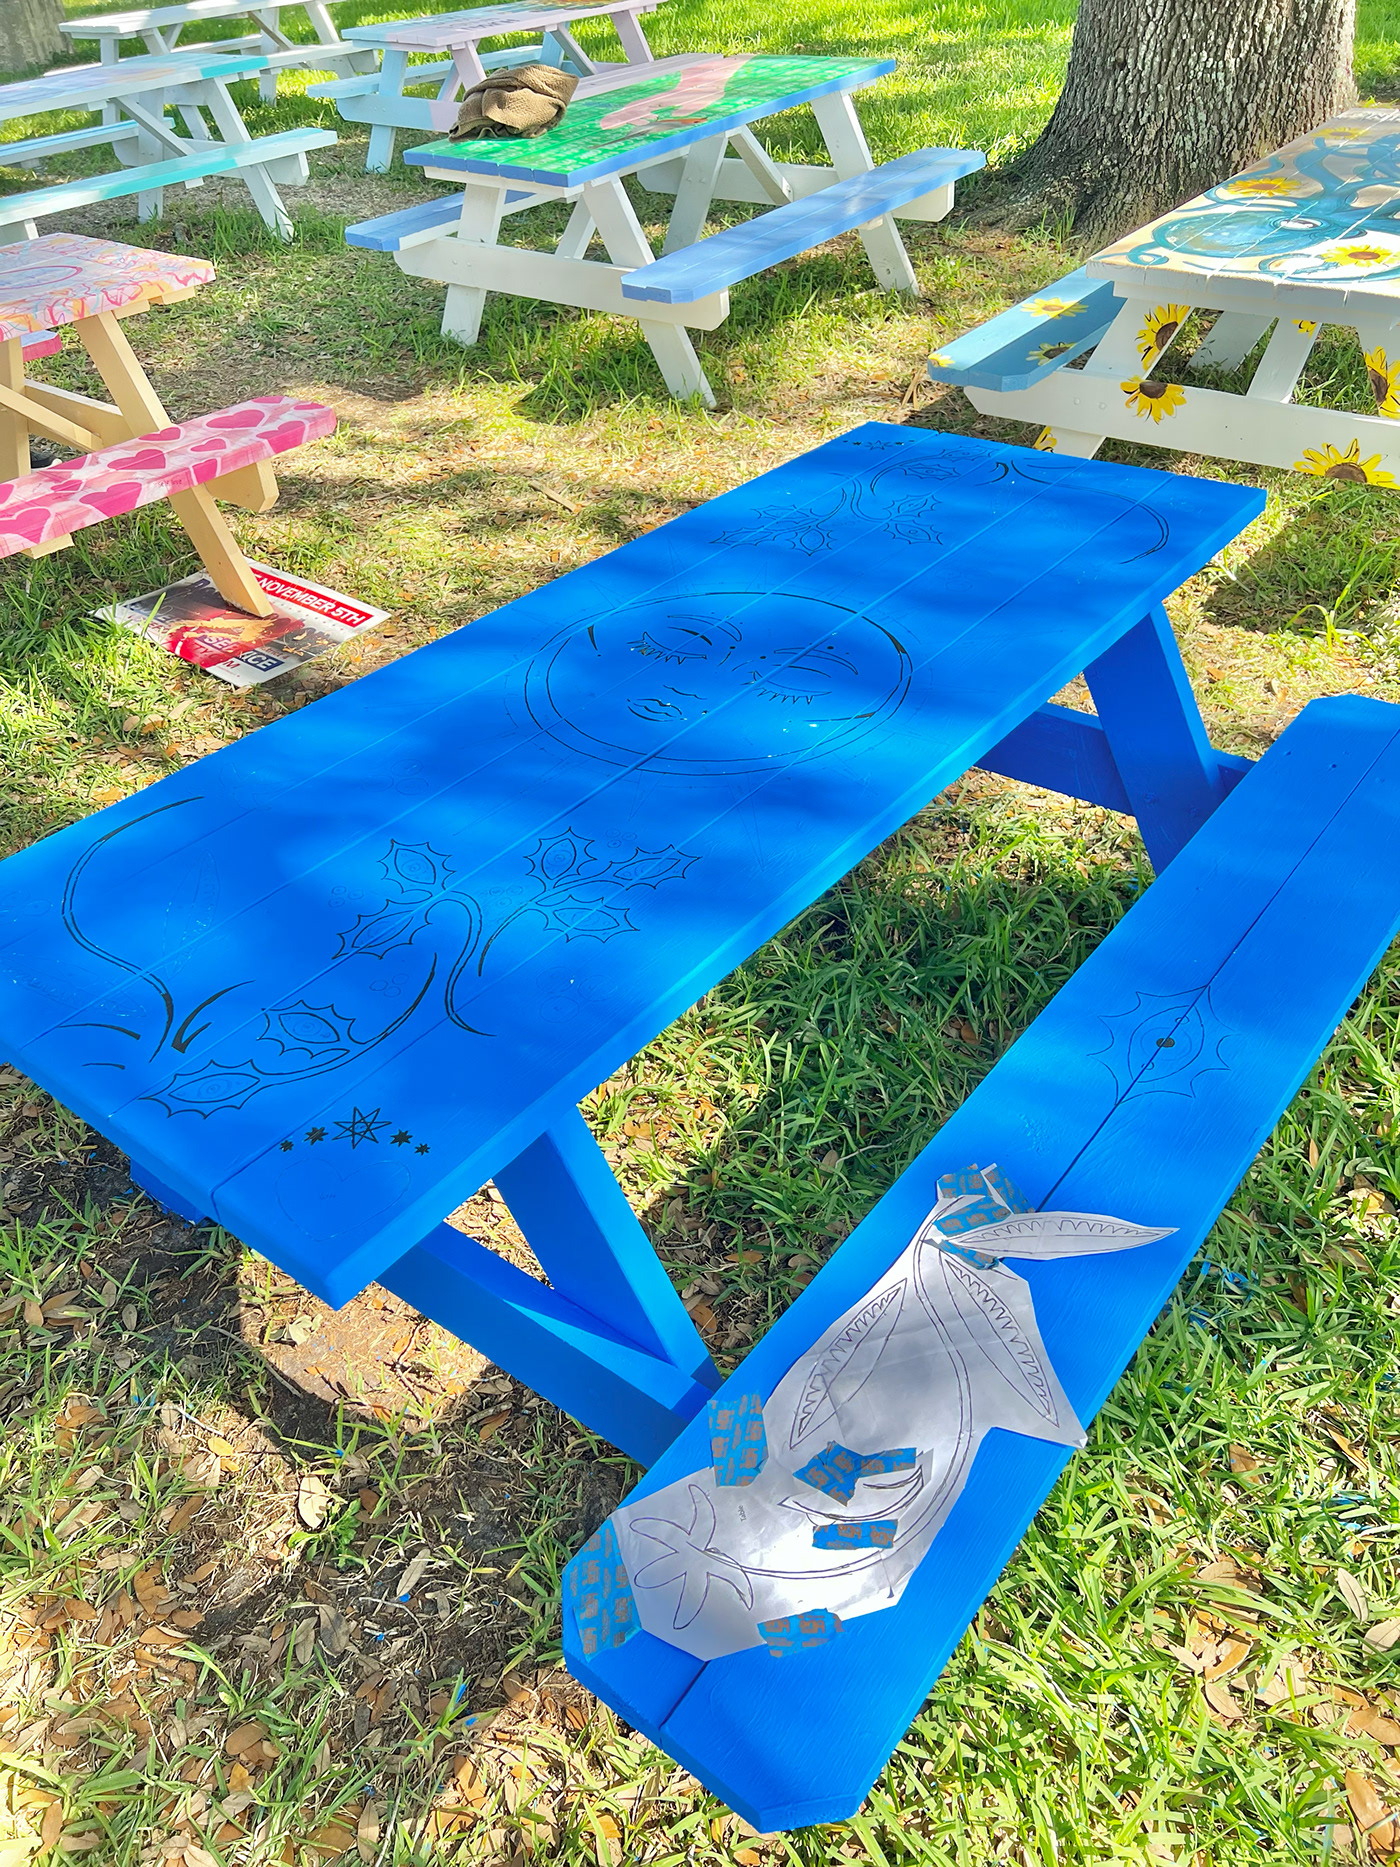 public art painting   Picnic Table Mural protection community blue